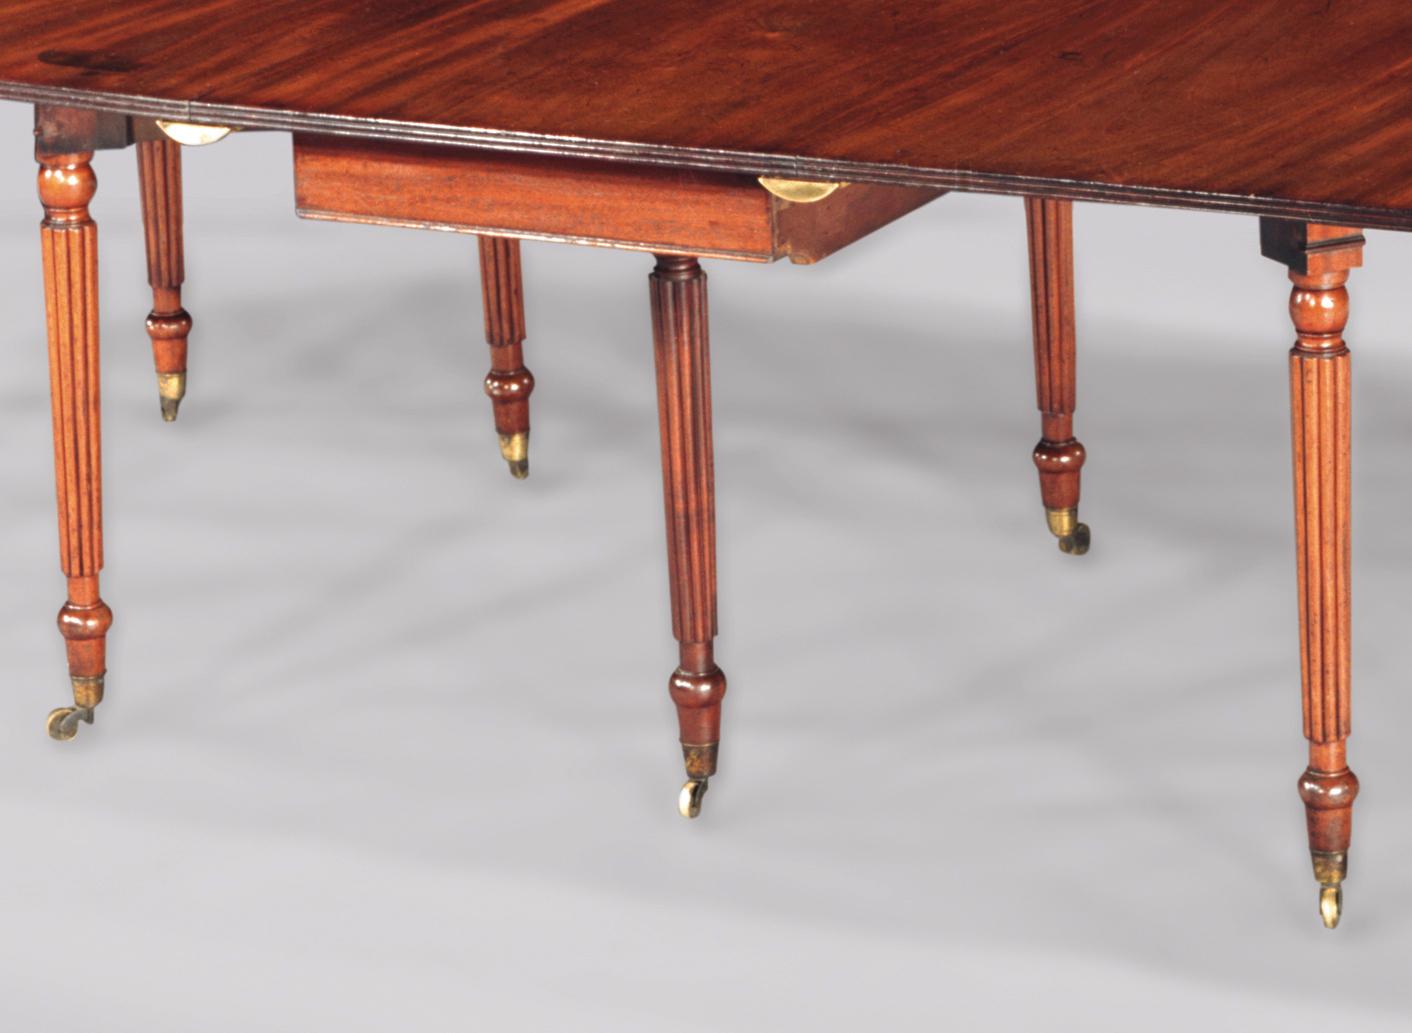 A good quality early 19th century Regency period golden mahogany reeded edged dining table having drop flap gate-leg actions to centre and ends, fitted with four removable leaves, supported on slender turned reeded legs ending on brass castors.